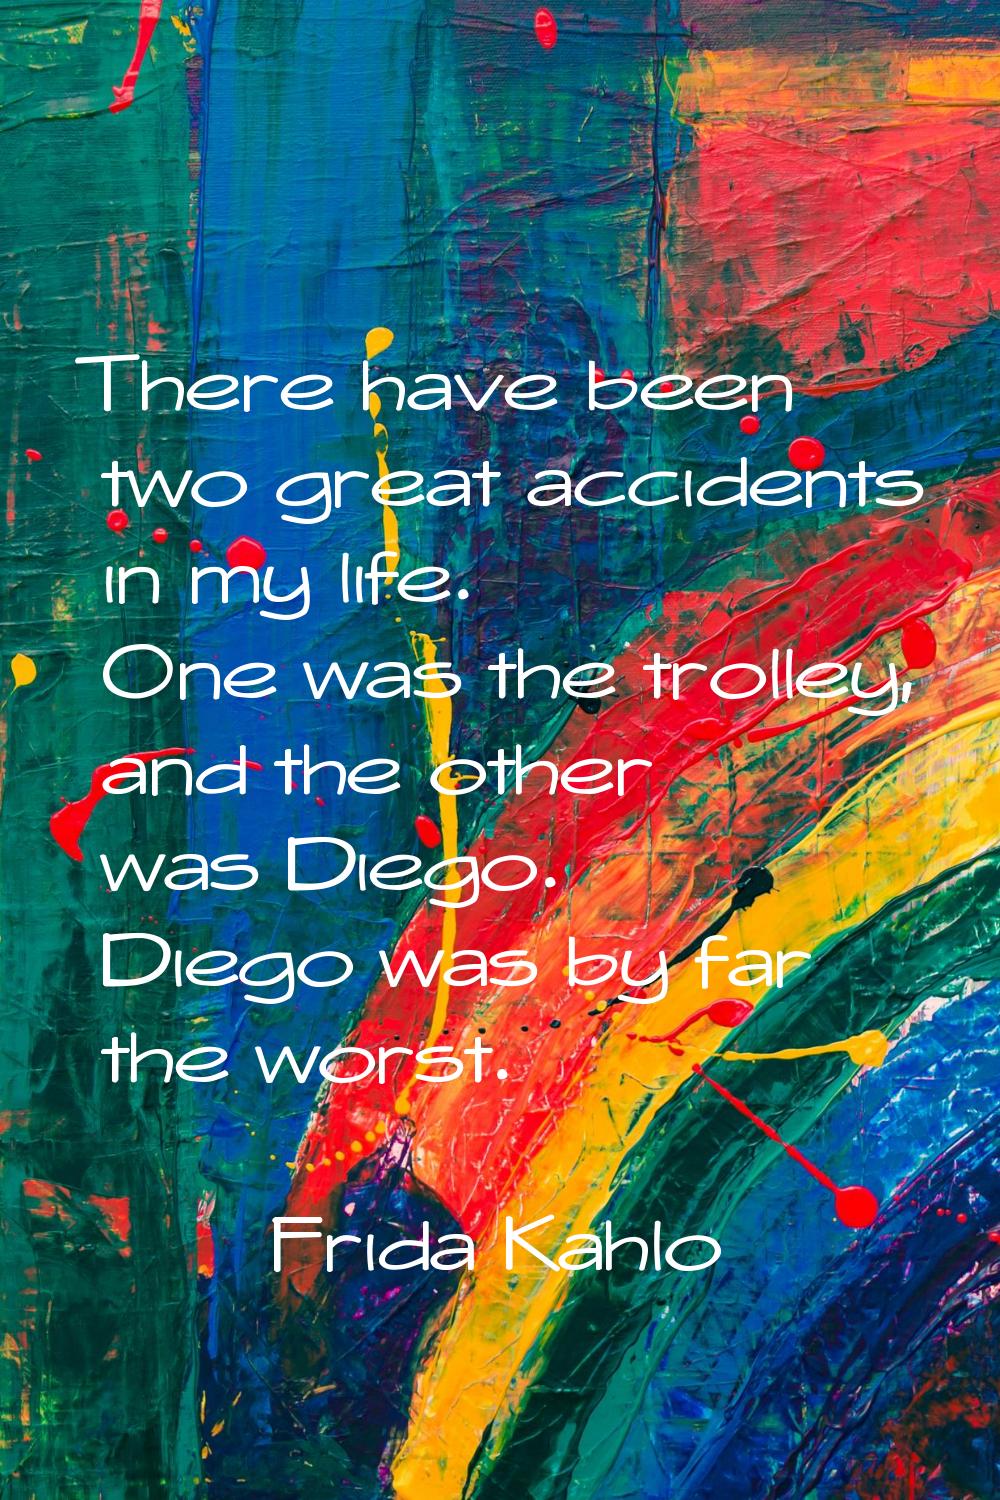 There have been two great accidents in my life. One was the trolley, and the other was Diego. Diego